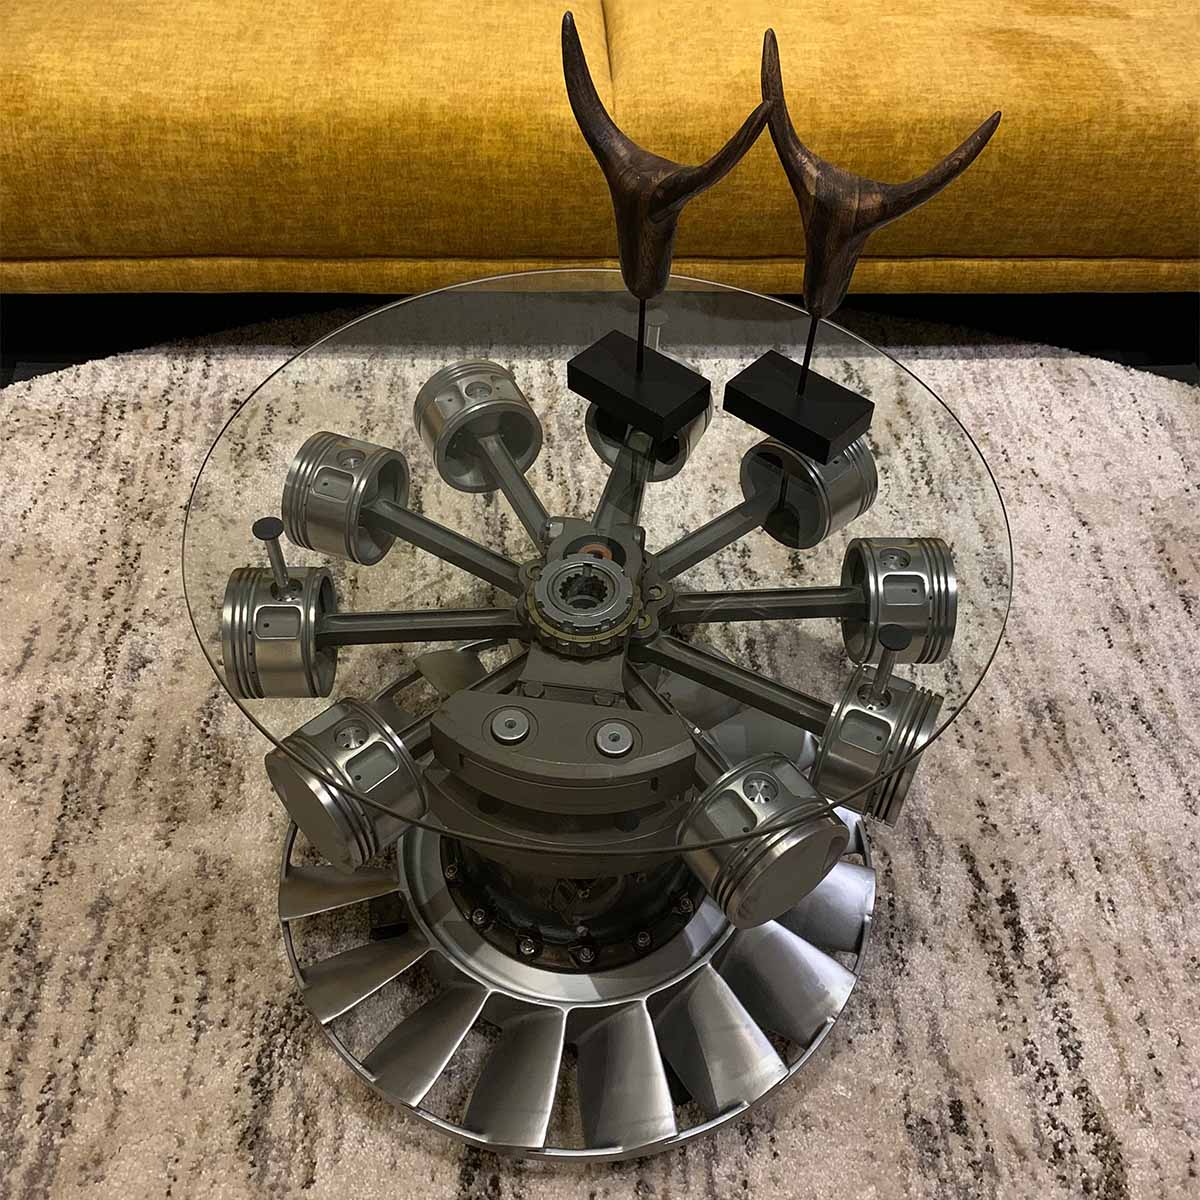 Kamov-26 helicopter engine turned into a table, positioned in a living room.